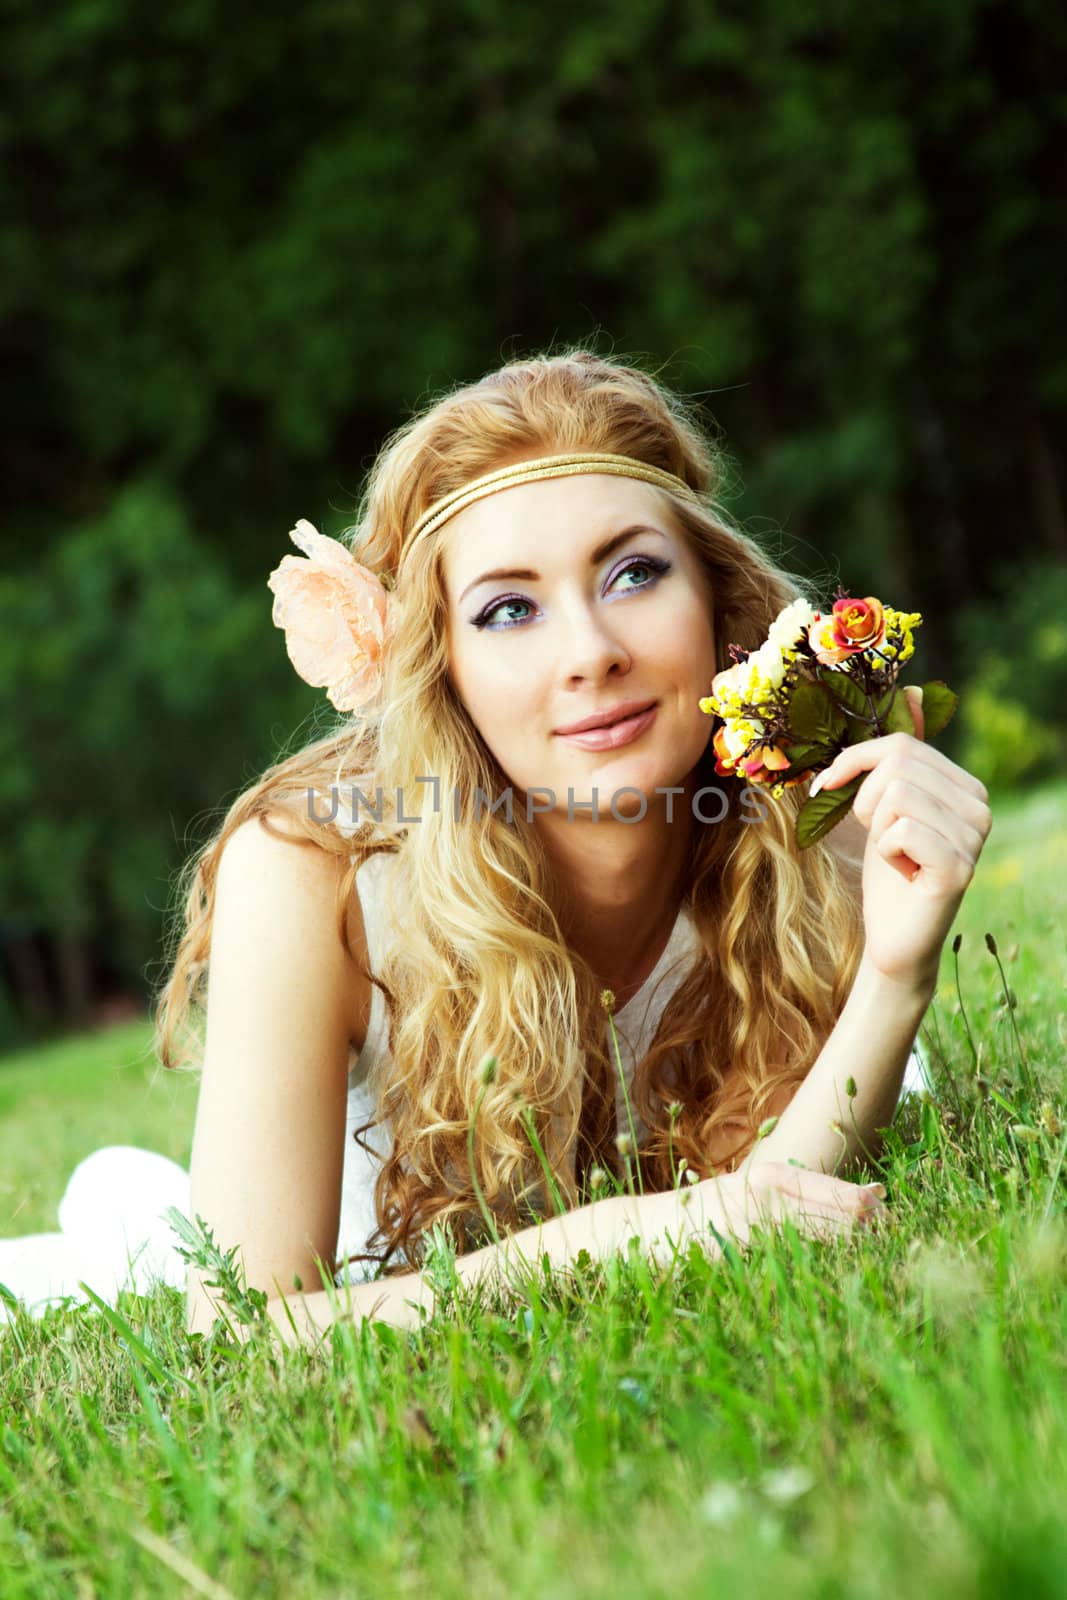 Romantic woman with rose lying on grass